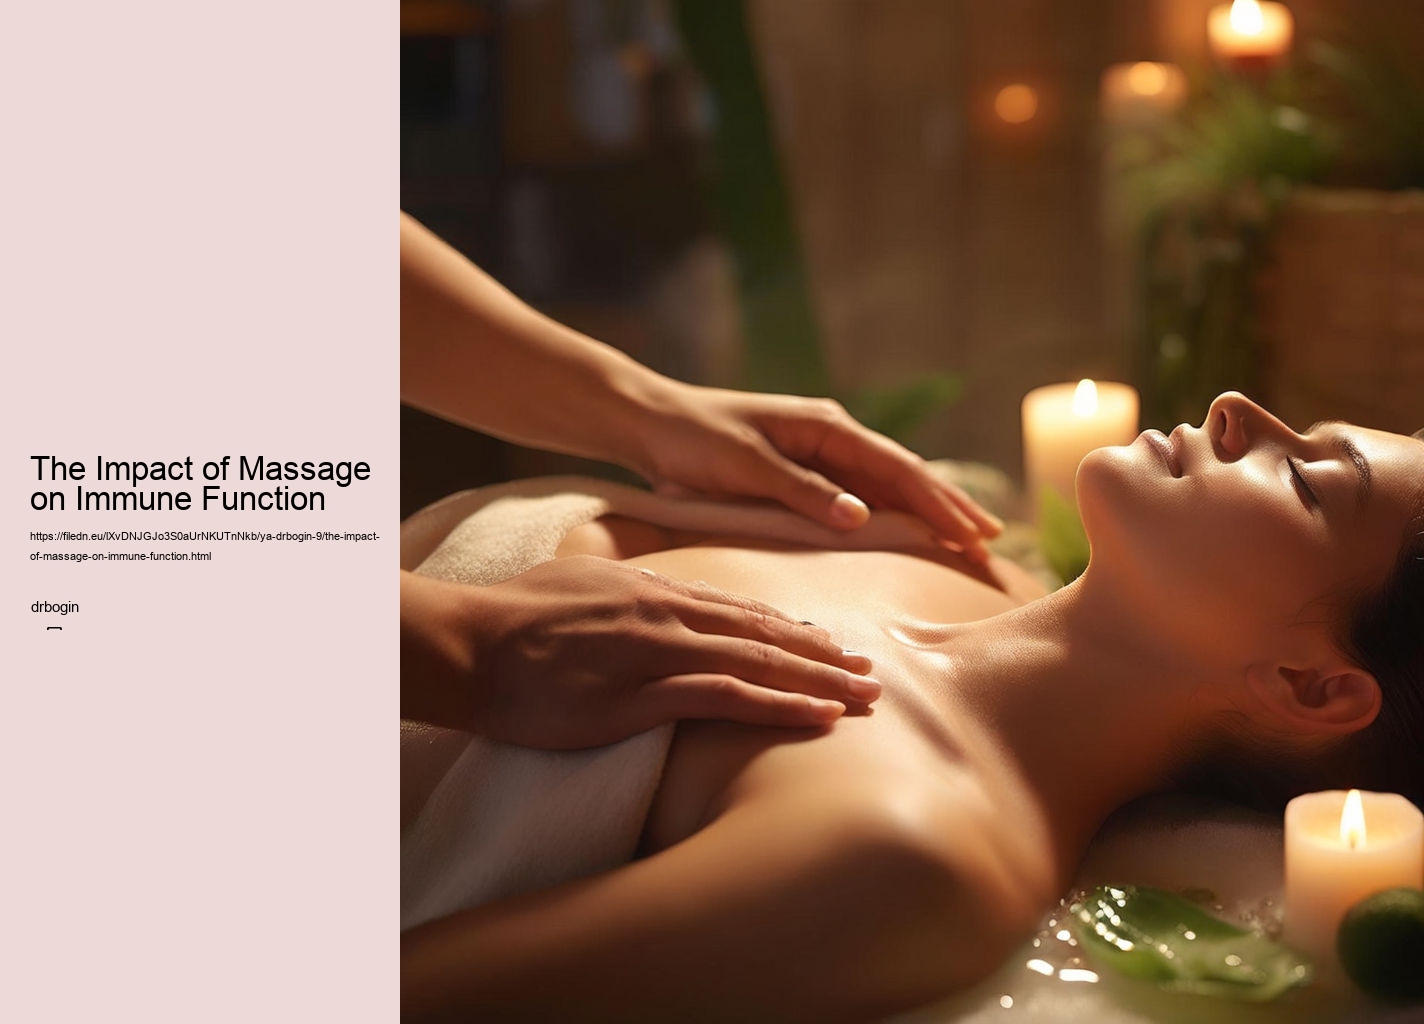 The Impact of Massage on Immune Function